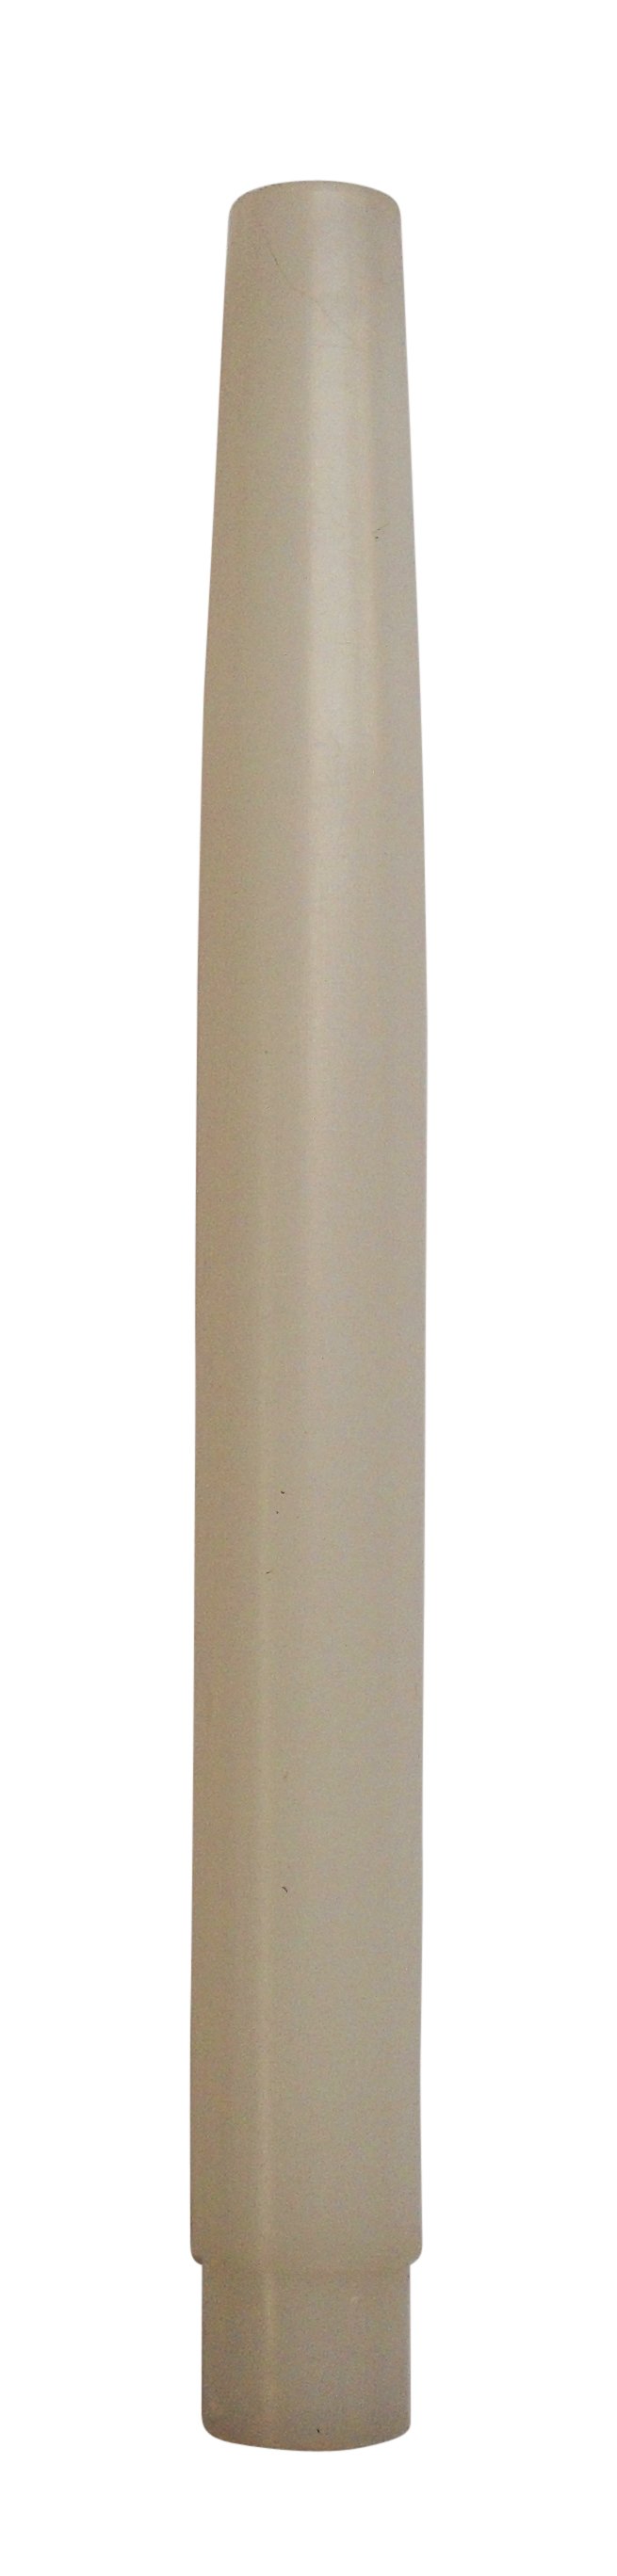 05718 E10 9" French Candle White 10mm Thread Entry - E10, White Plastic, 10mm Thread Entry